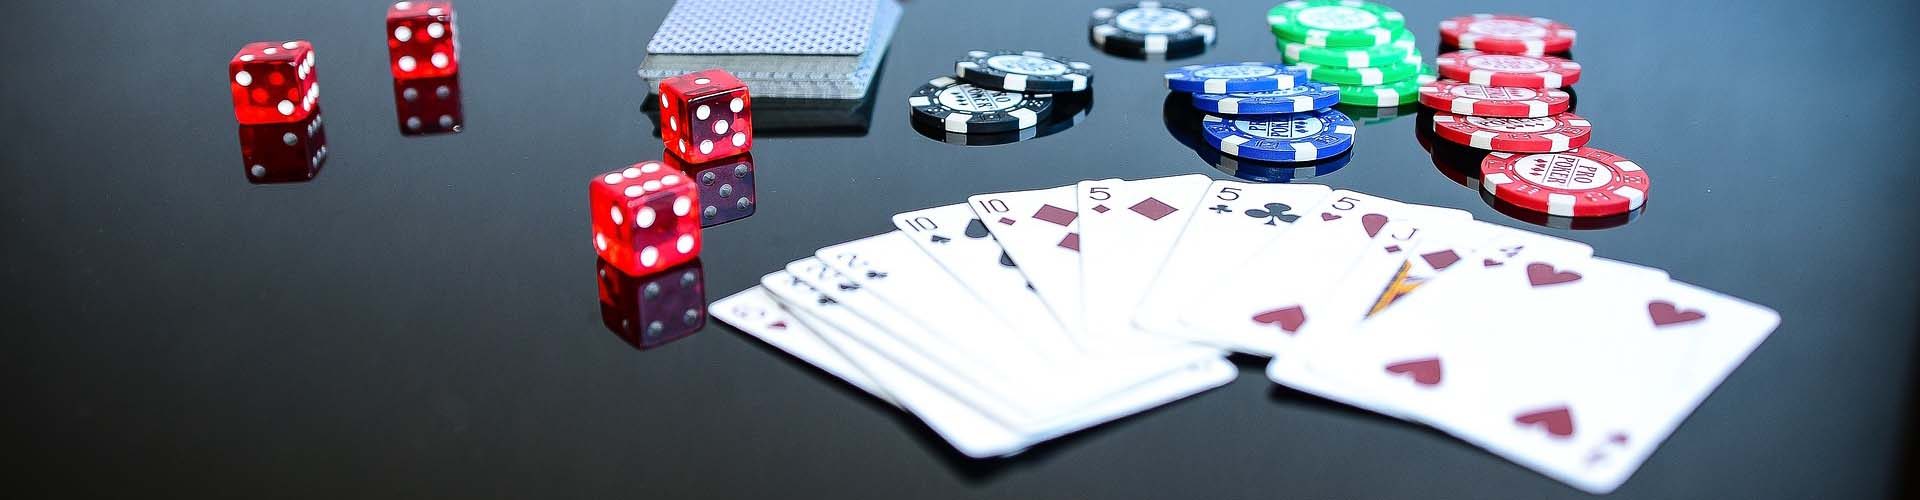 Online casinos and Poker